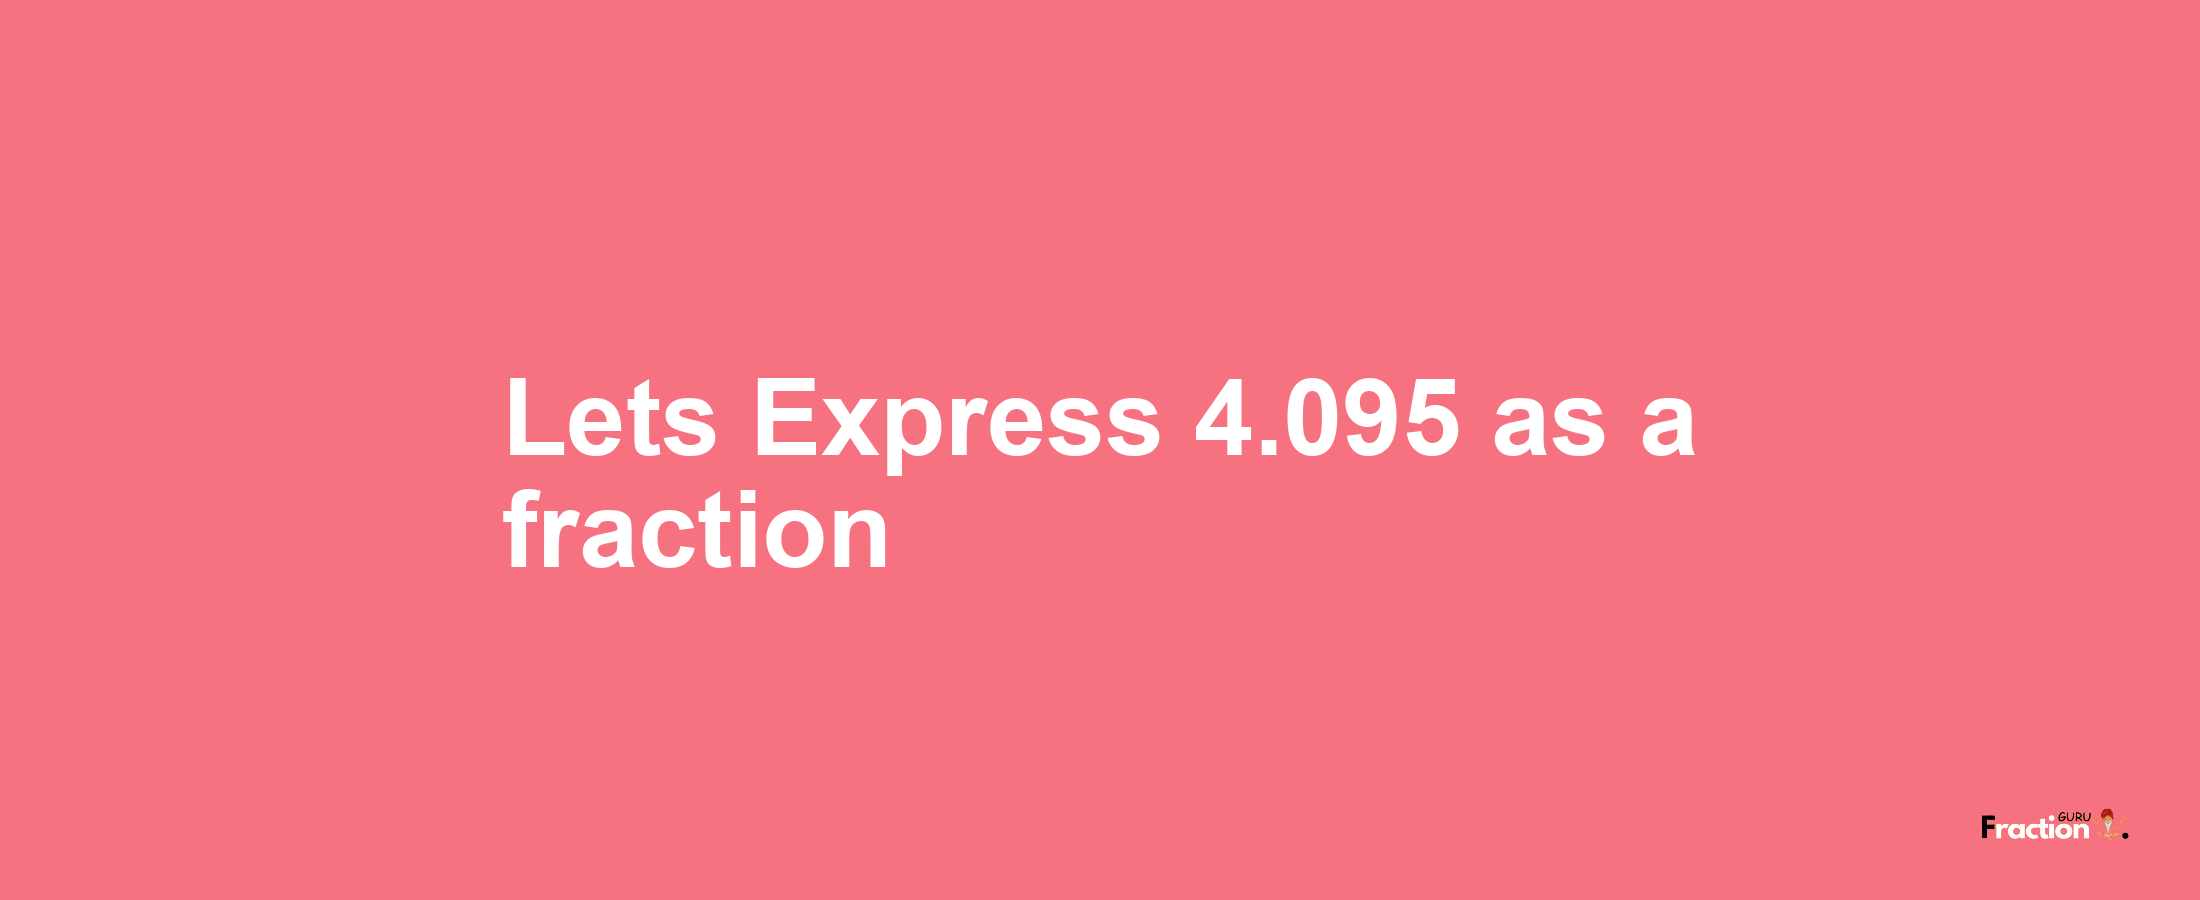 Lets Express 4.095 as afraction